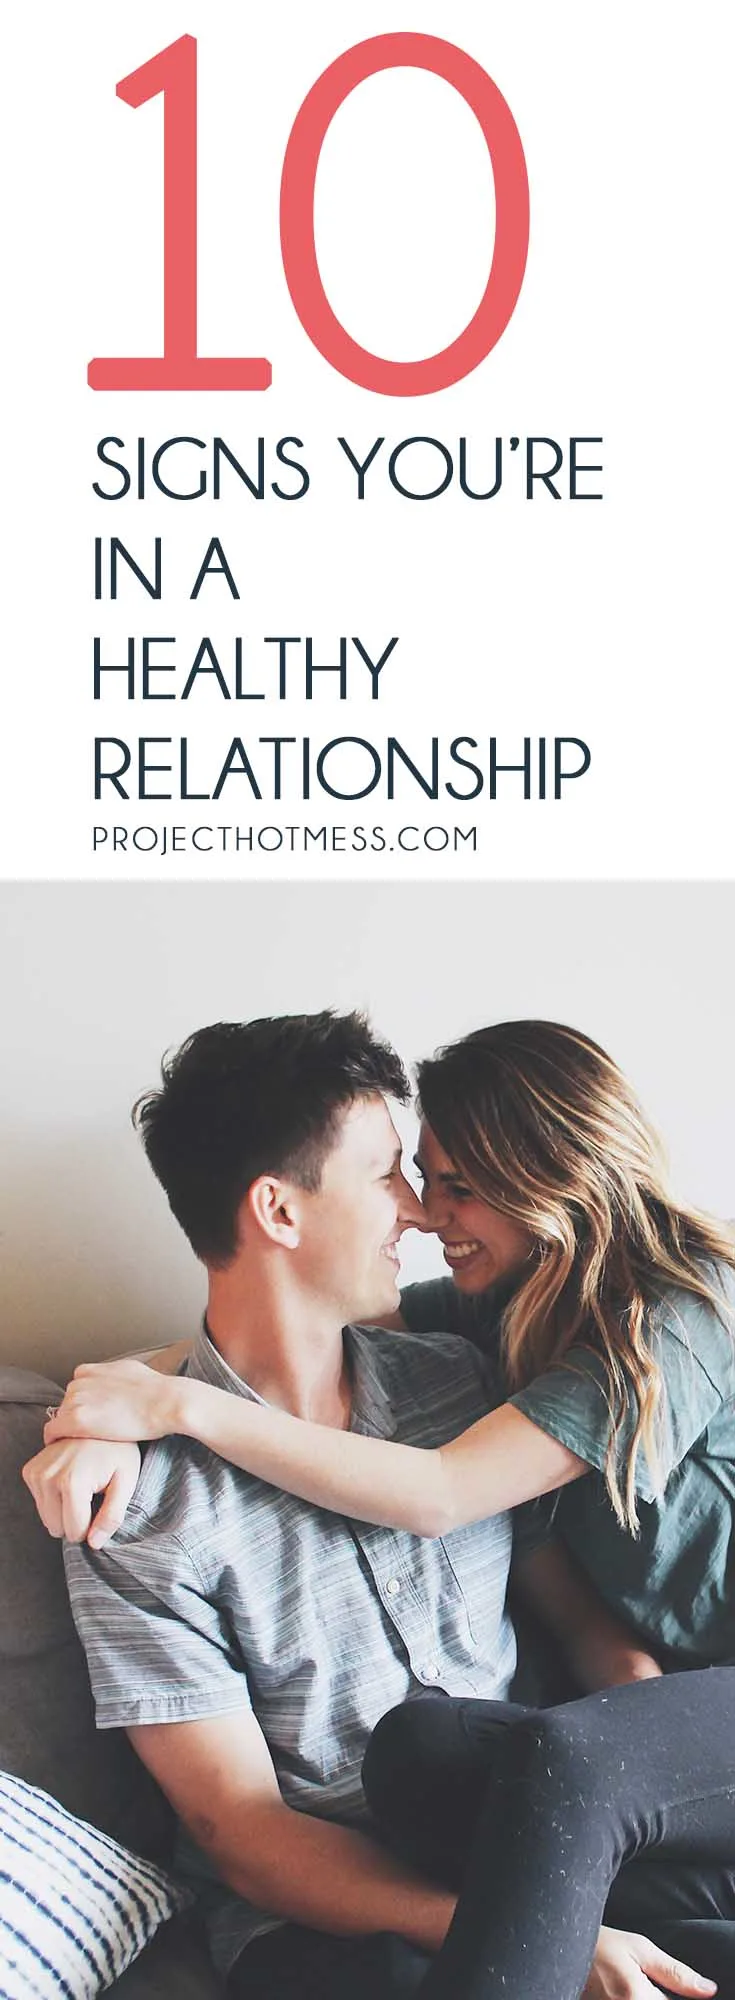 Relationships are hard work, and for some of us we can get stuck in a toxic relationship. But how do you know when you're in a healthy relationship instead? Here are some of the most obvious, but sometimes overlooked, signs that you're in a healthy relationship! Relationships | Relationship Goals | Happy Relationships | Marriage | Happy Marriage | Marriage Goals | Married Life | 